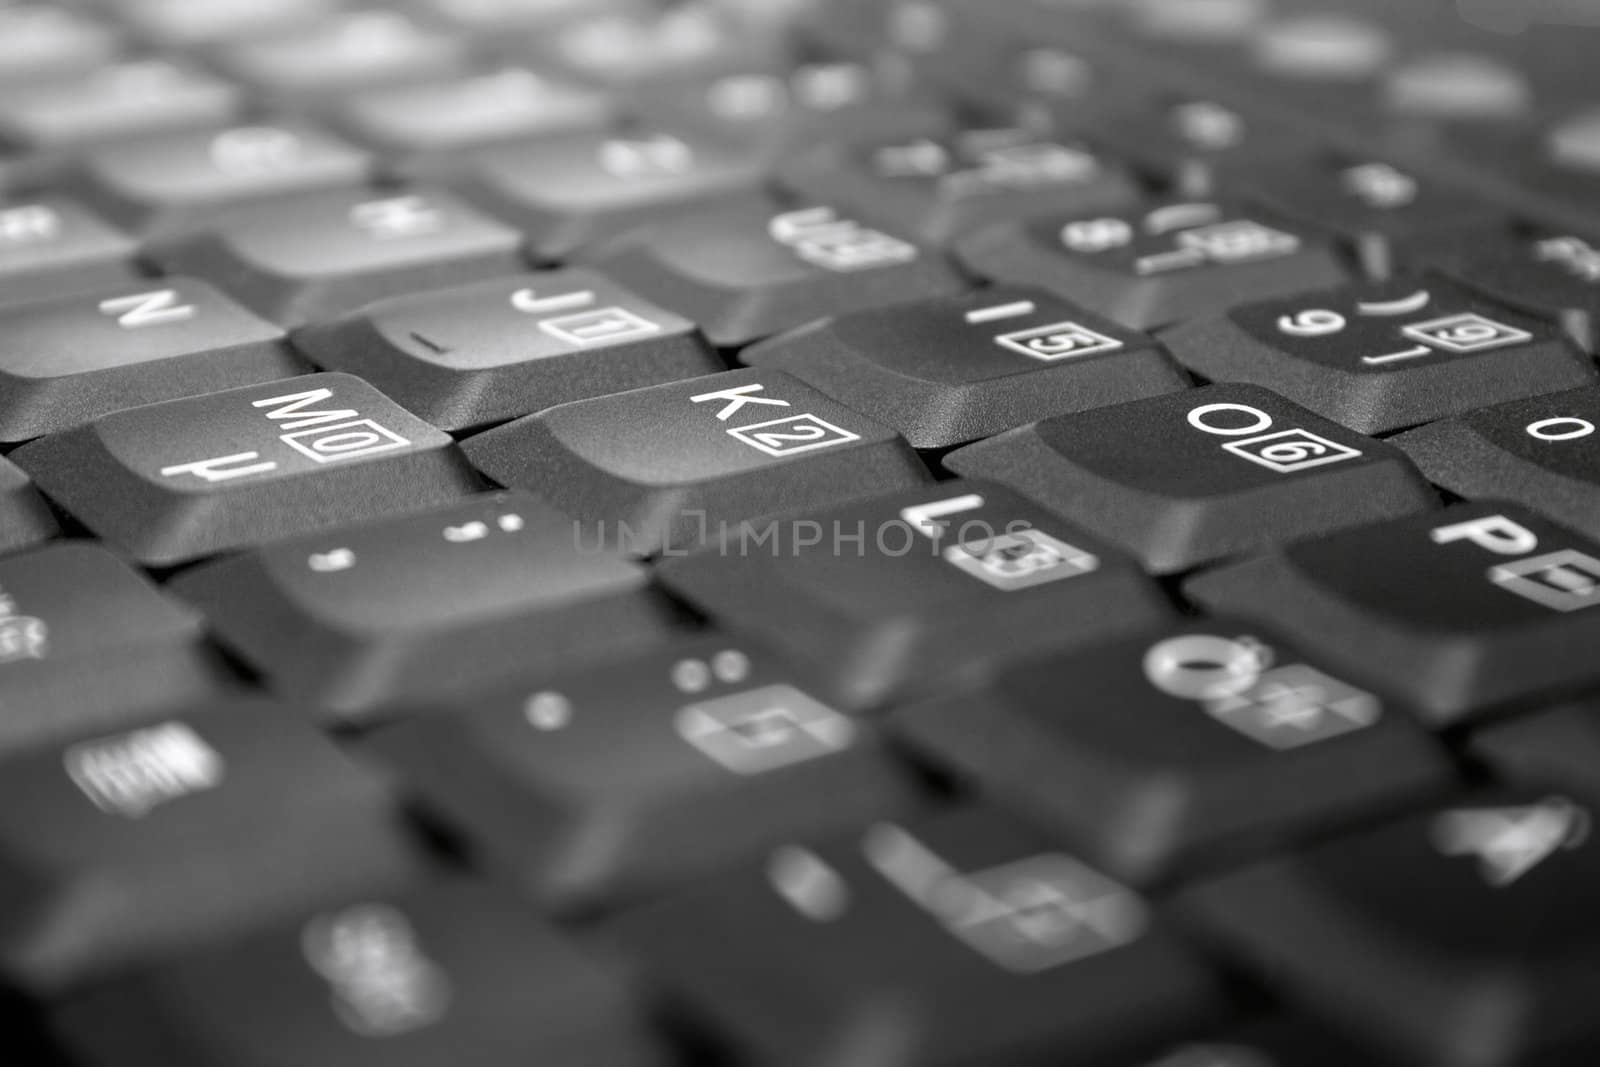 Detail view on gray laptop keys. Shallow depth of field. Focus on M, K, O.